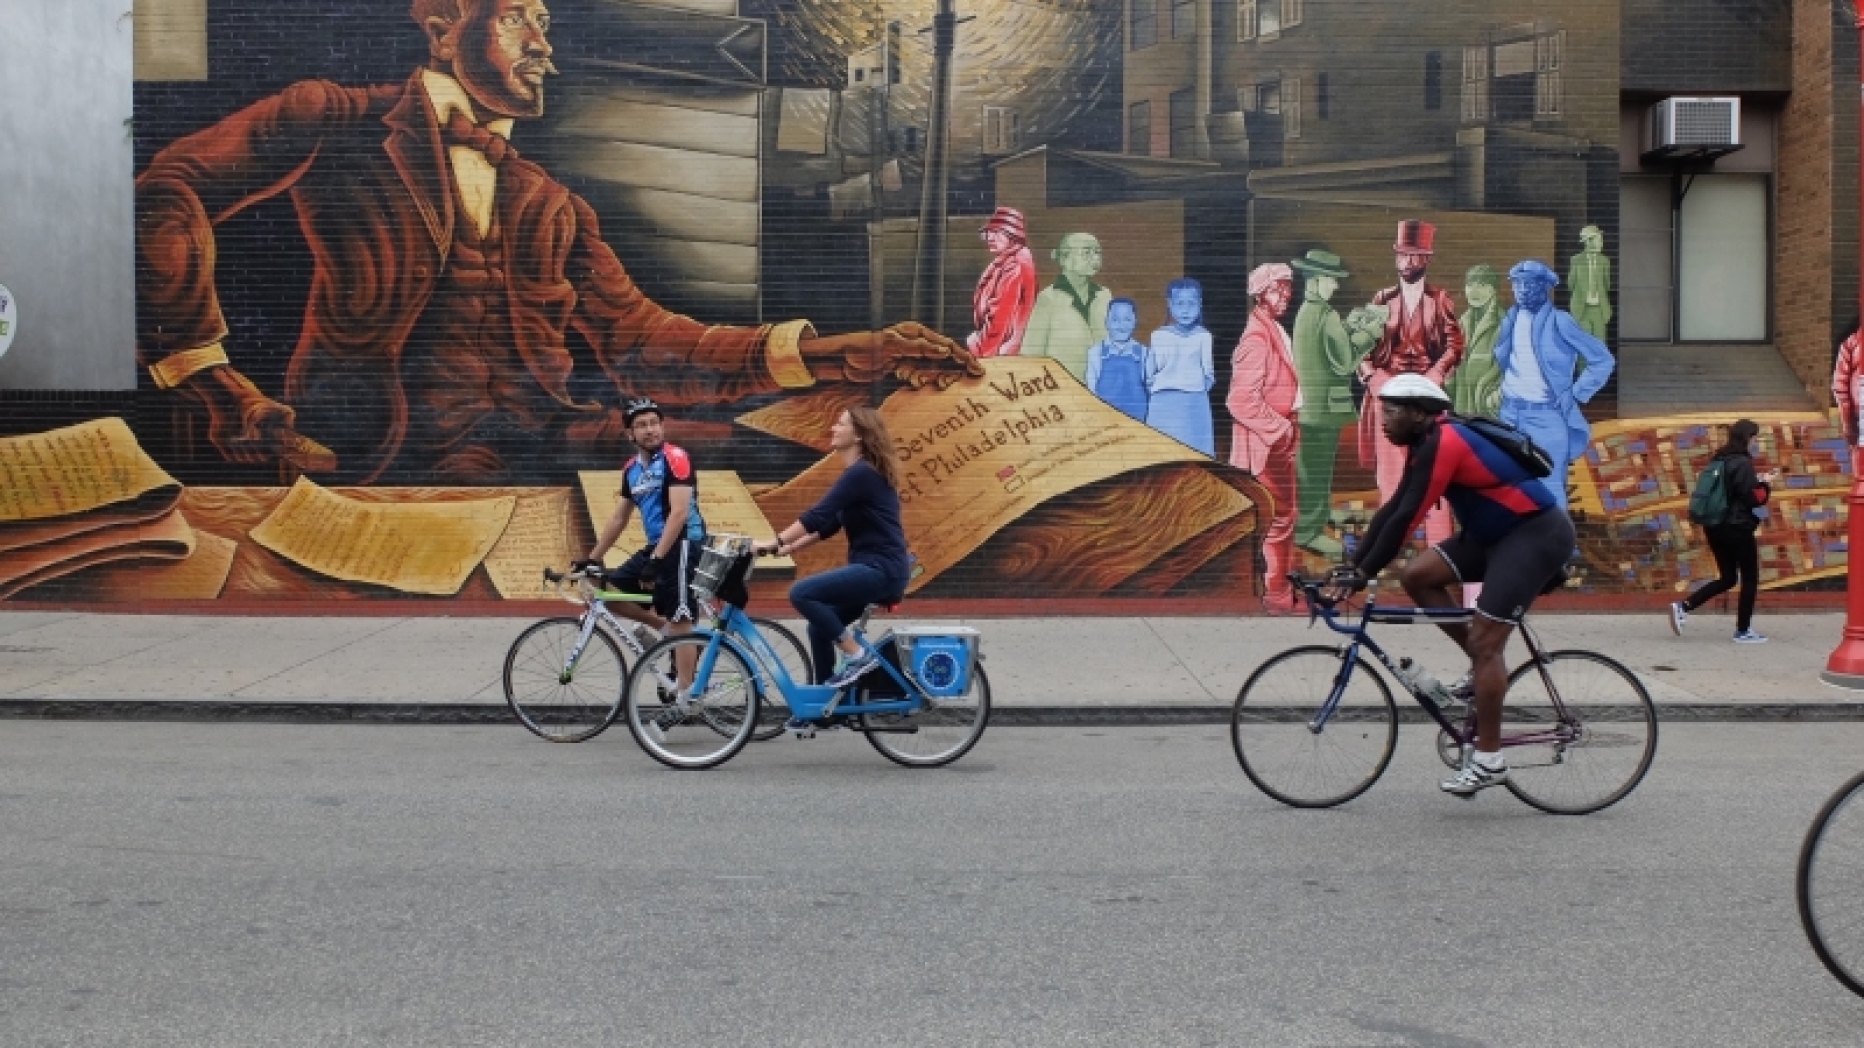 People riding bicycles in front of a mural.